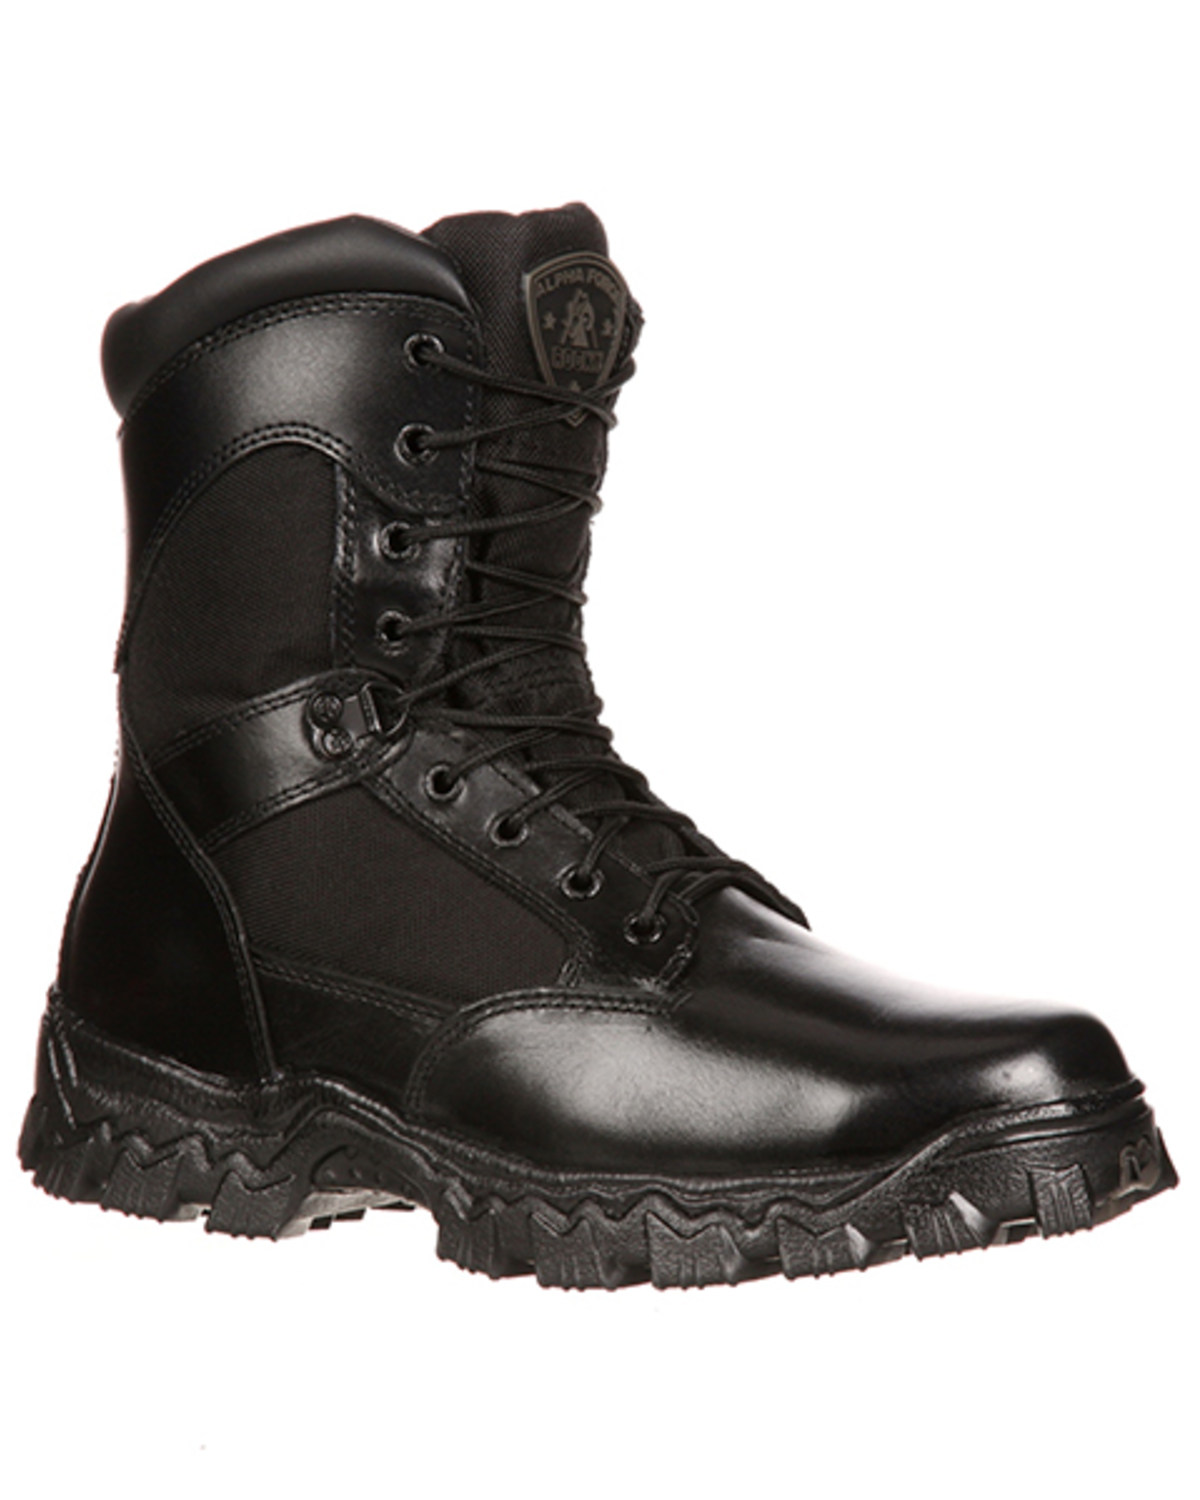 Rocky Men's Alpha Force Military Boots